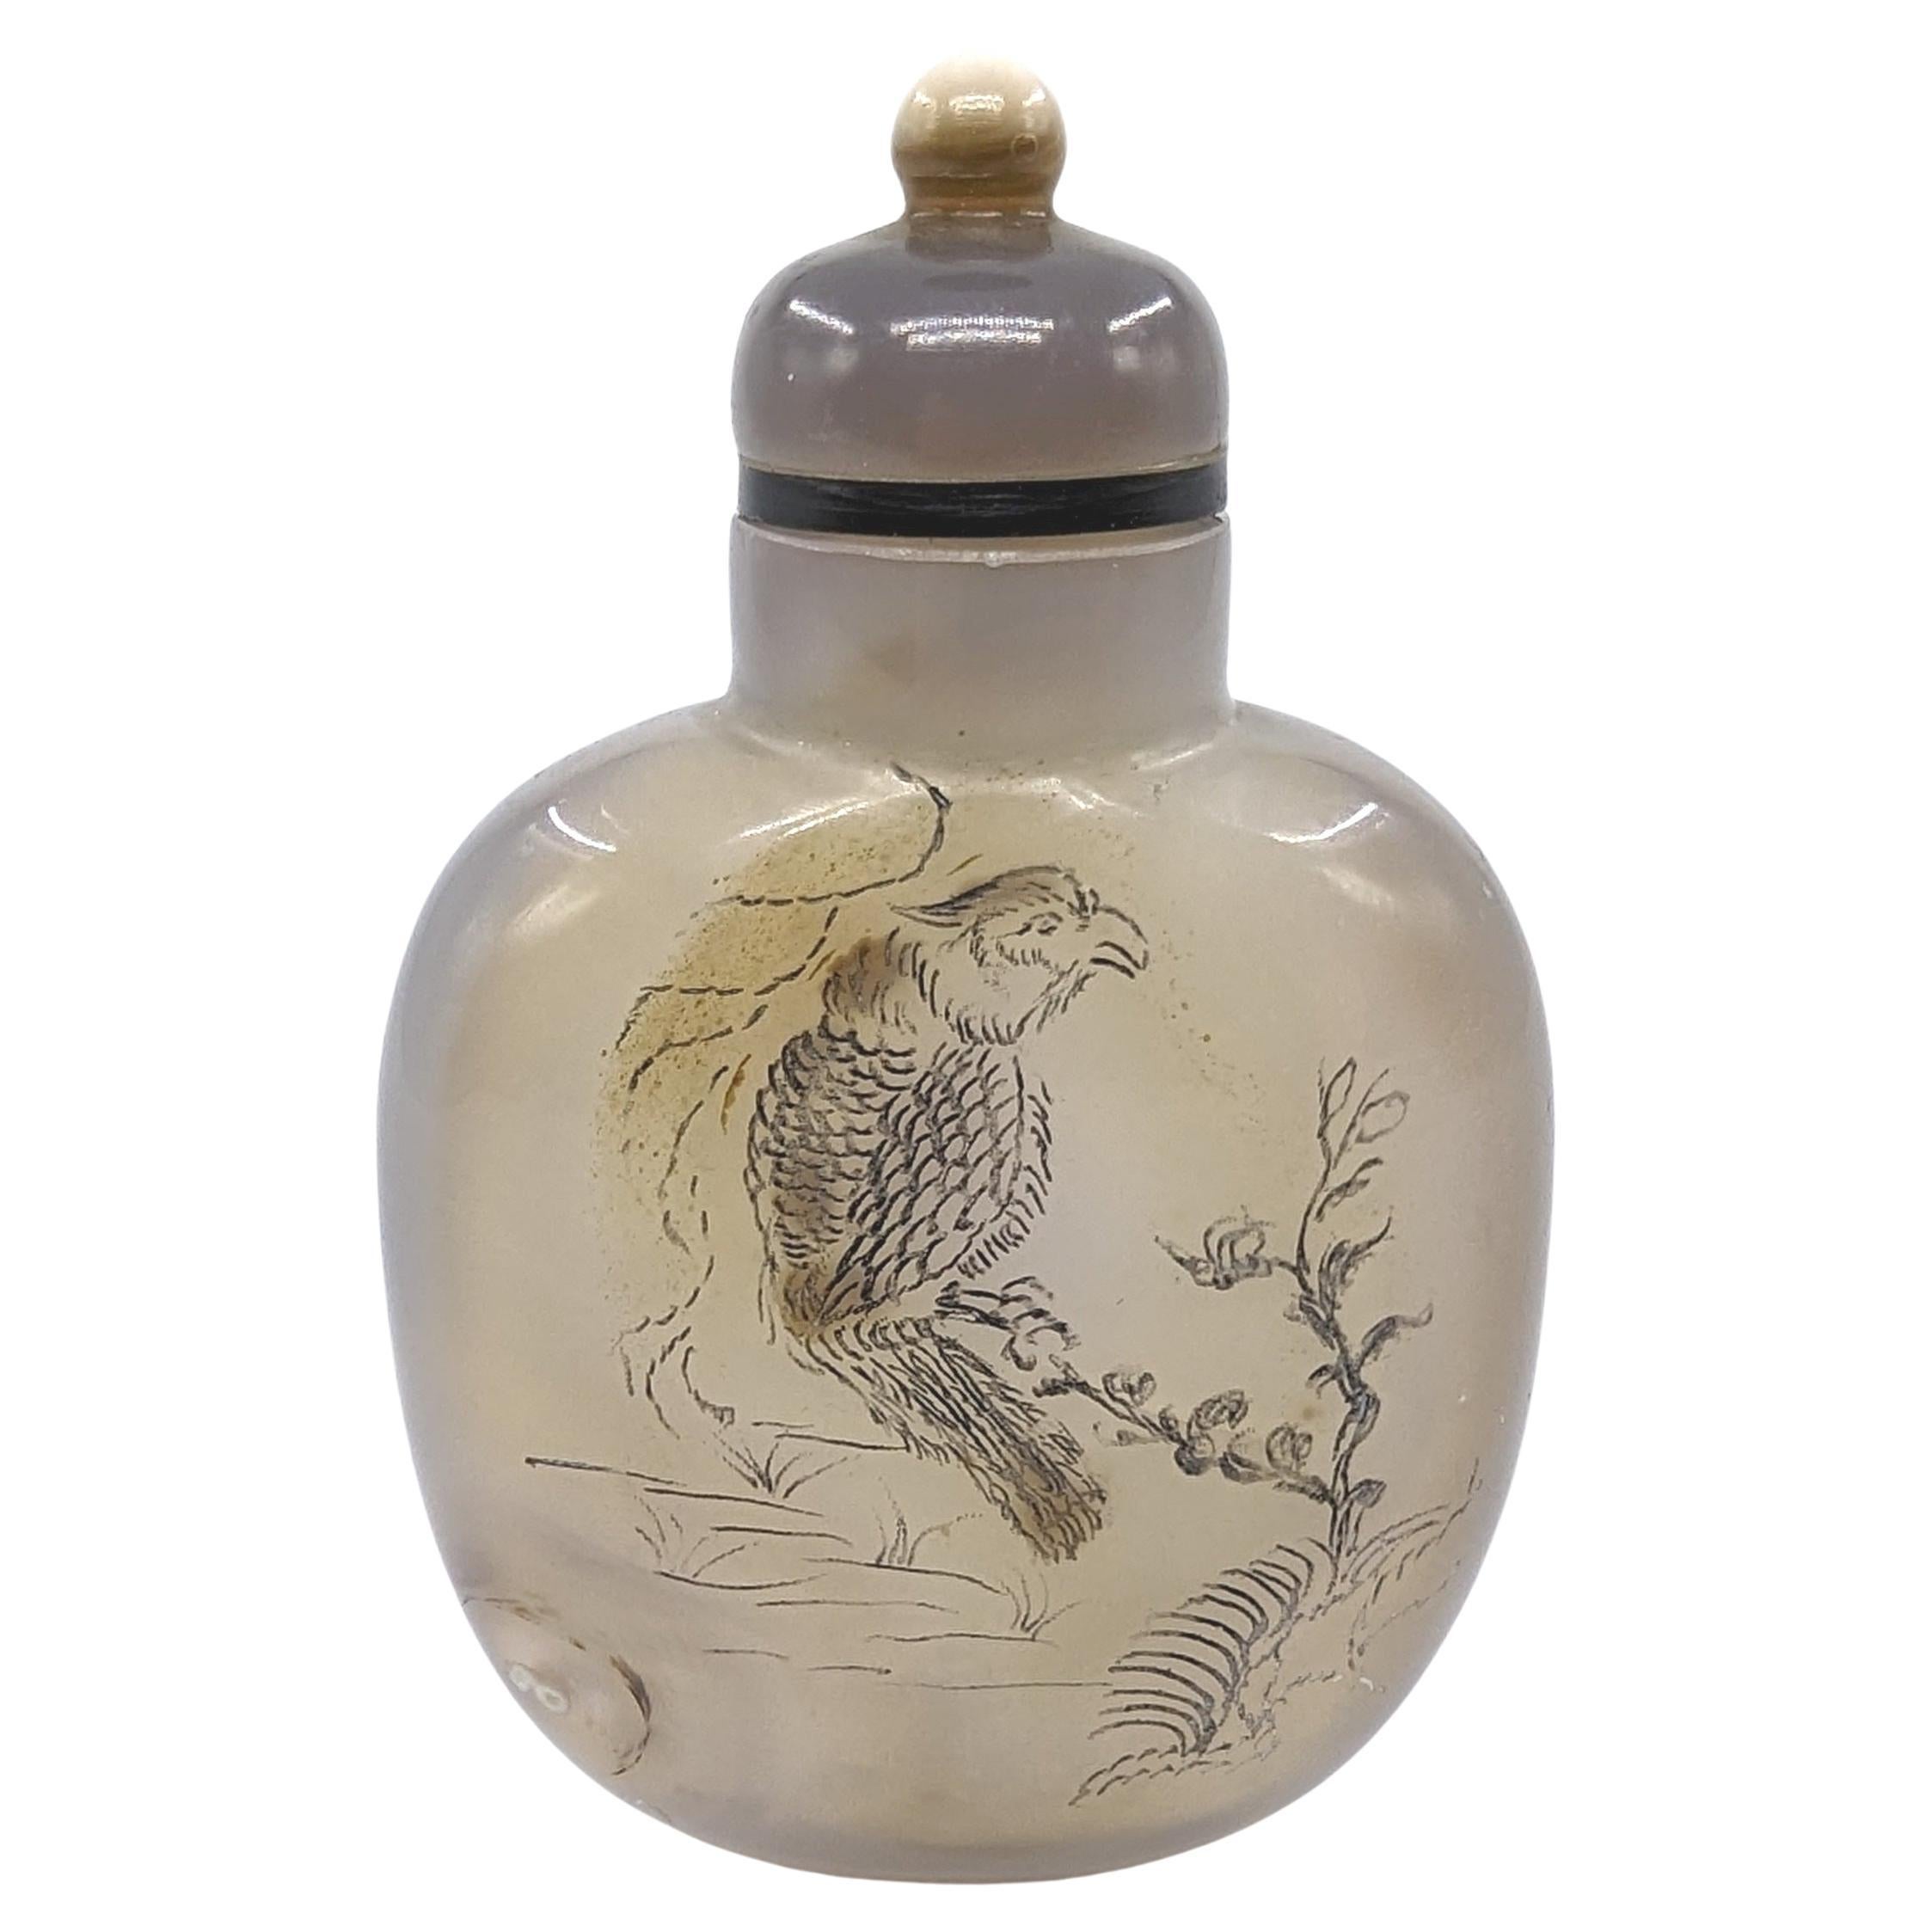 Antique Chinese moss agate snuff bottle, with incised and filled decoration of a bird in a garden scene to one side, and natural dendrite formations showing well disbursed moss patterns on the other side. This bottle is well hollowed, with a carved